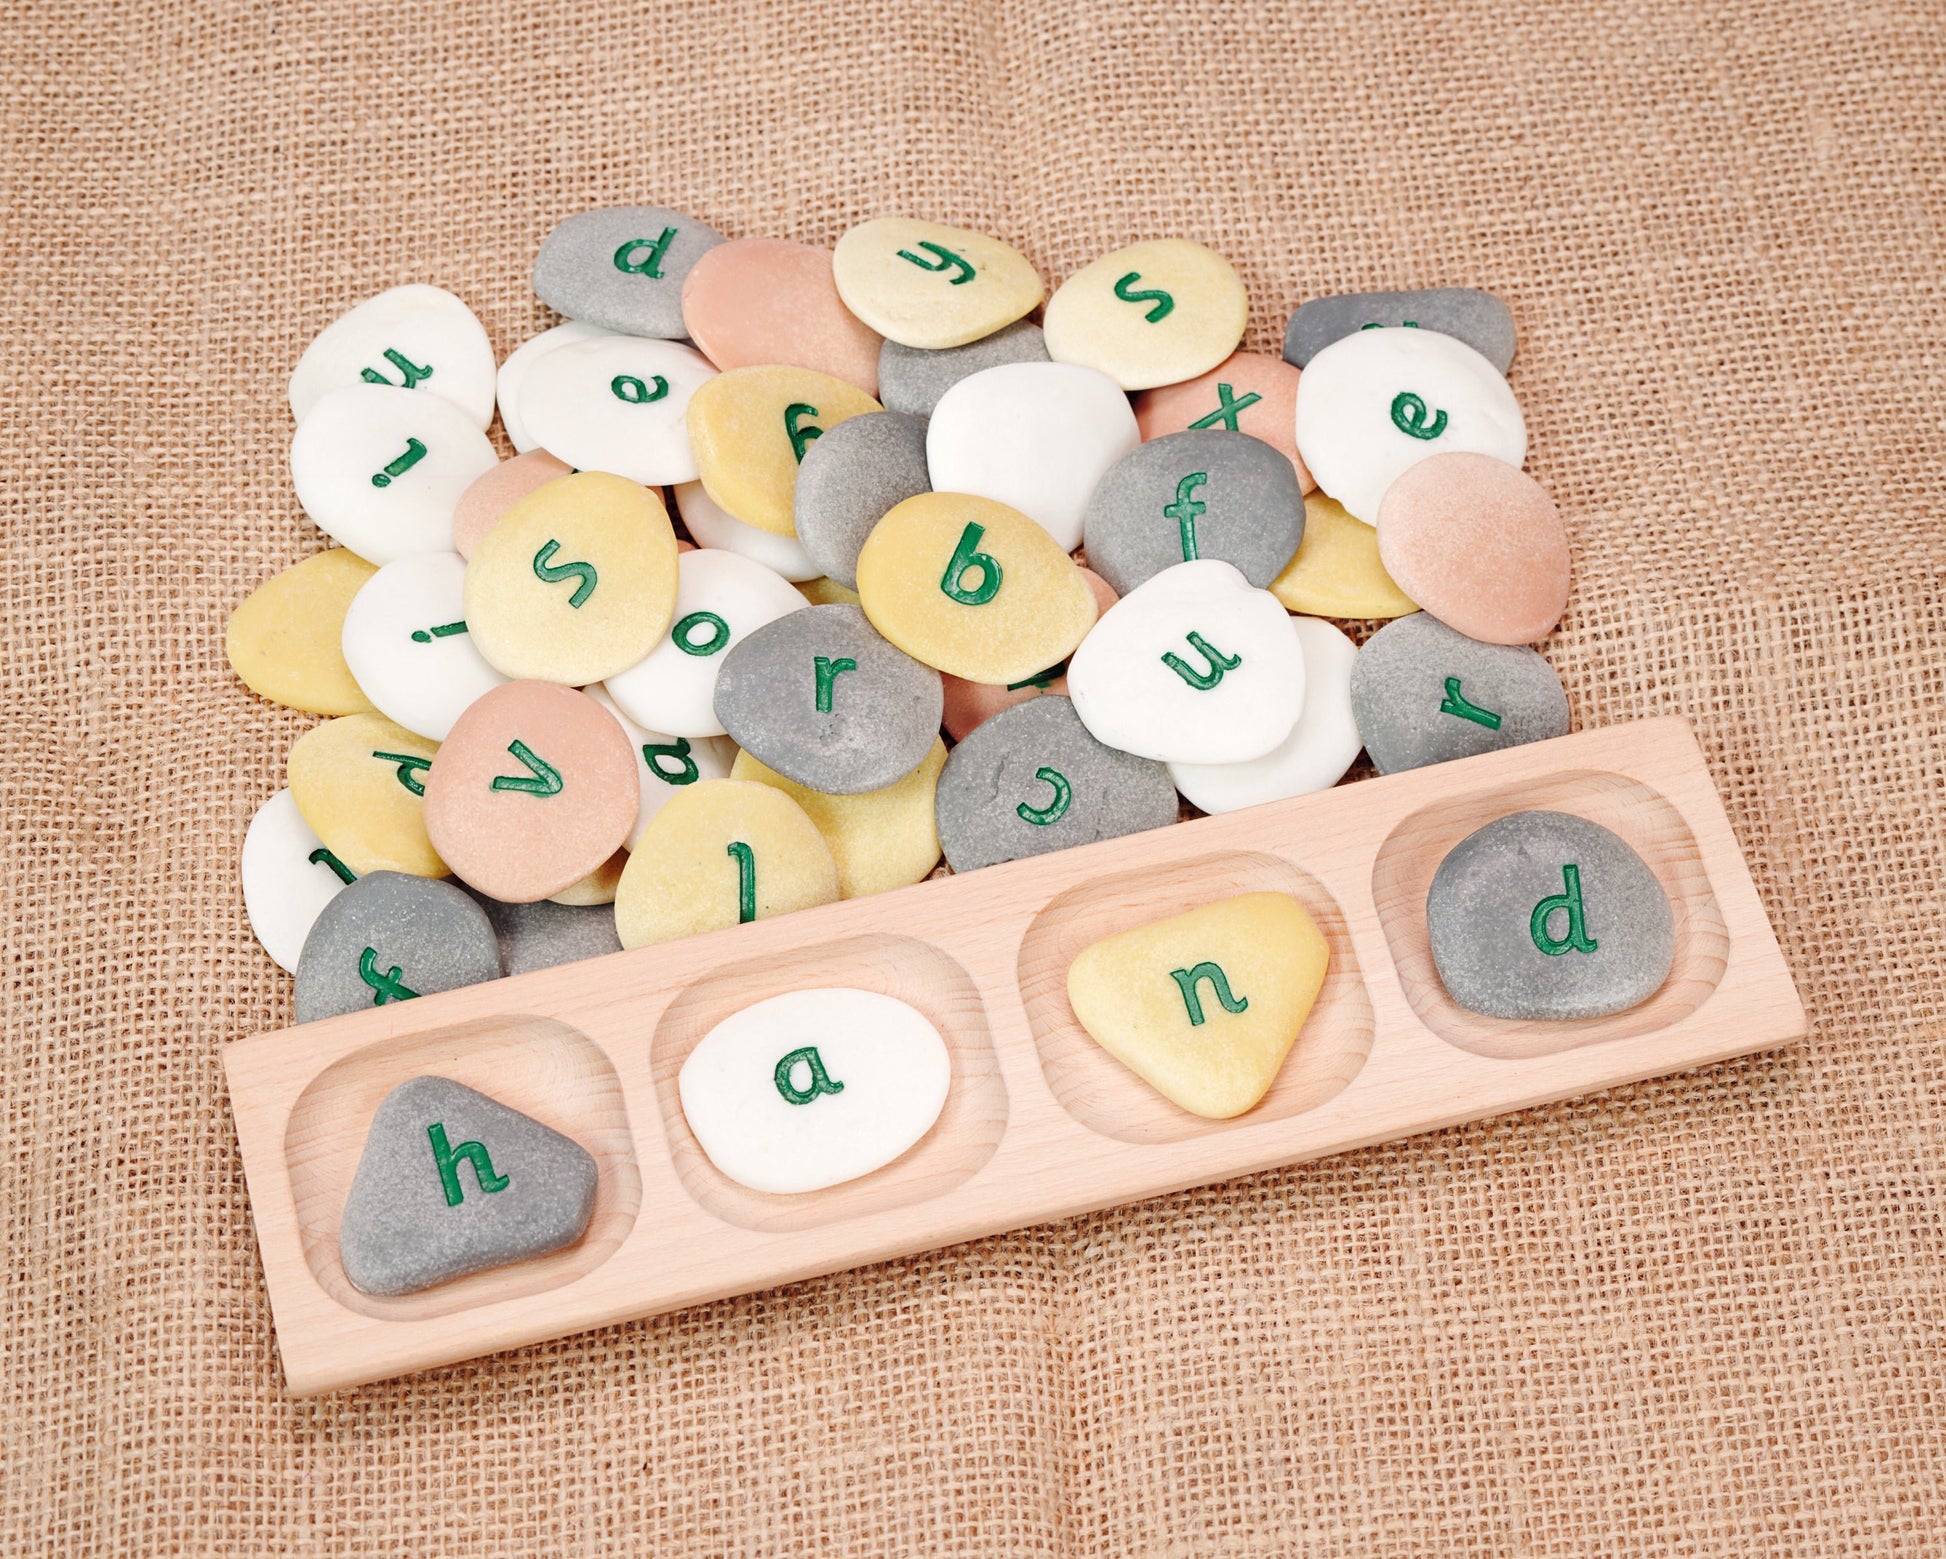 4-Pebble Word-Building Tray | Learning and Exploring Through Play